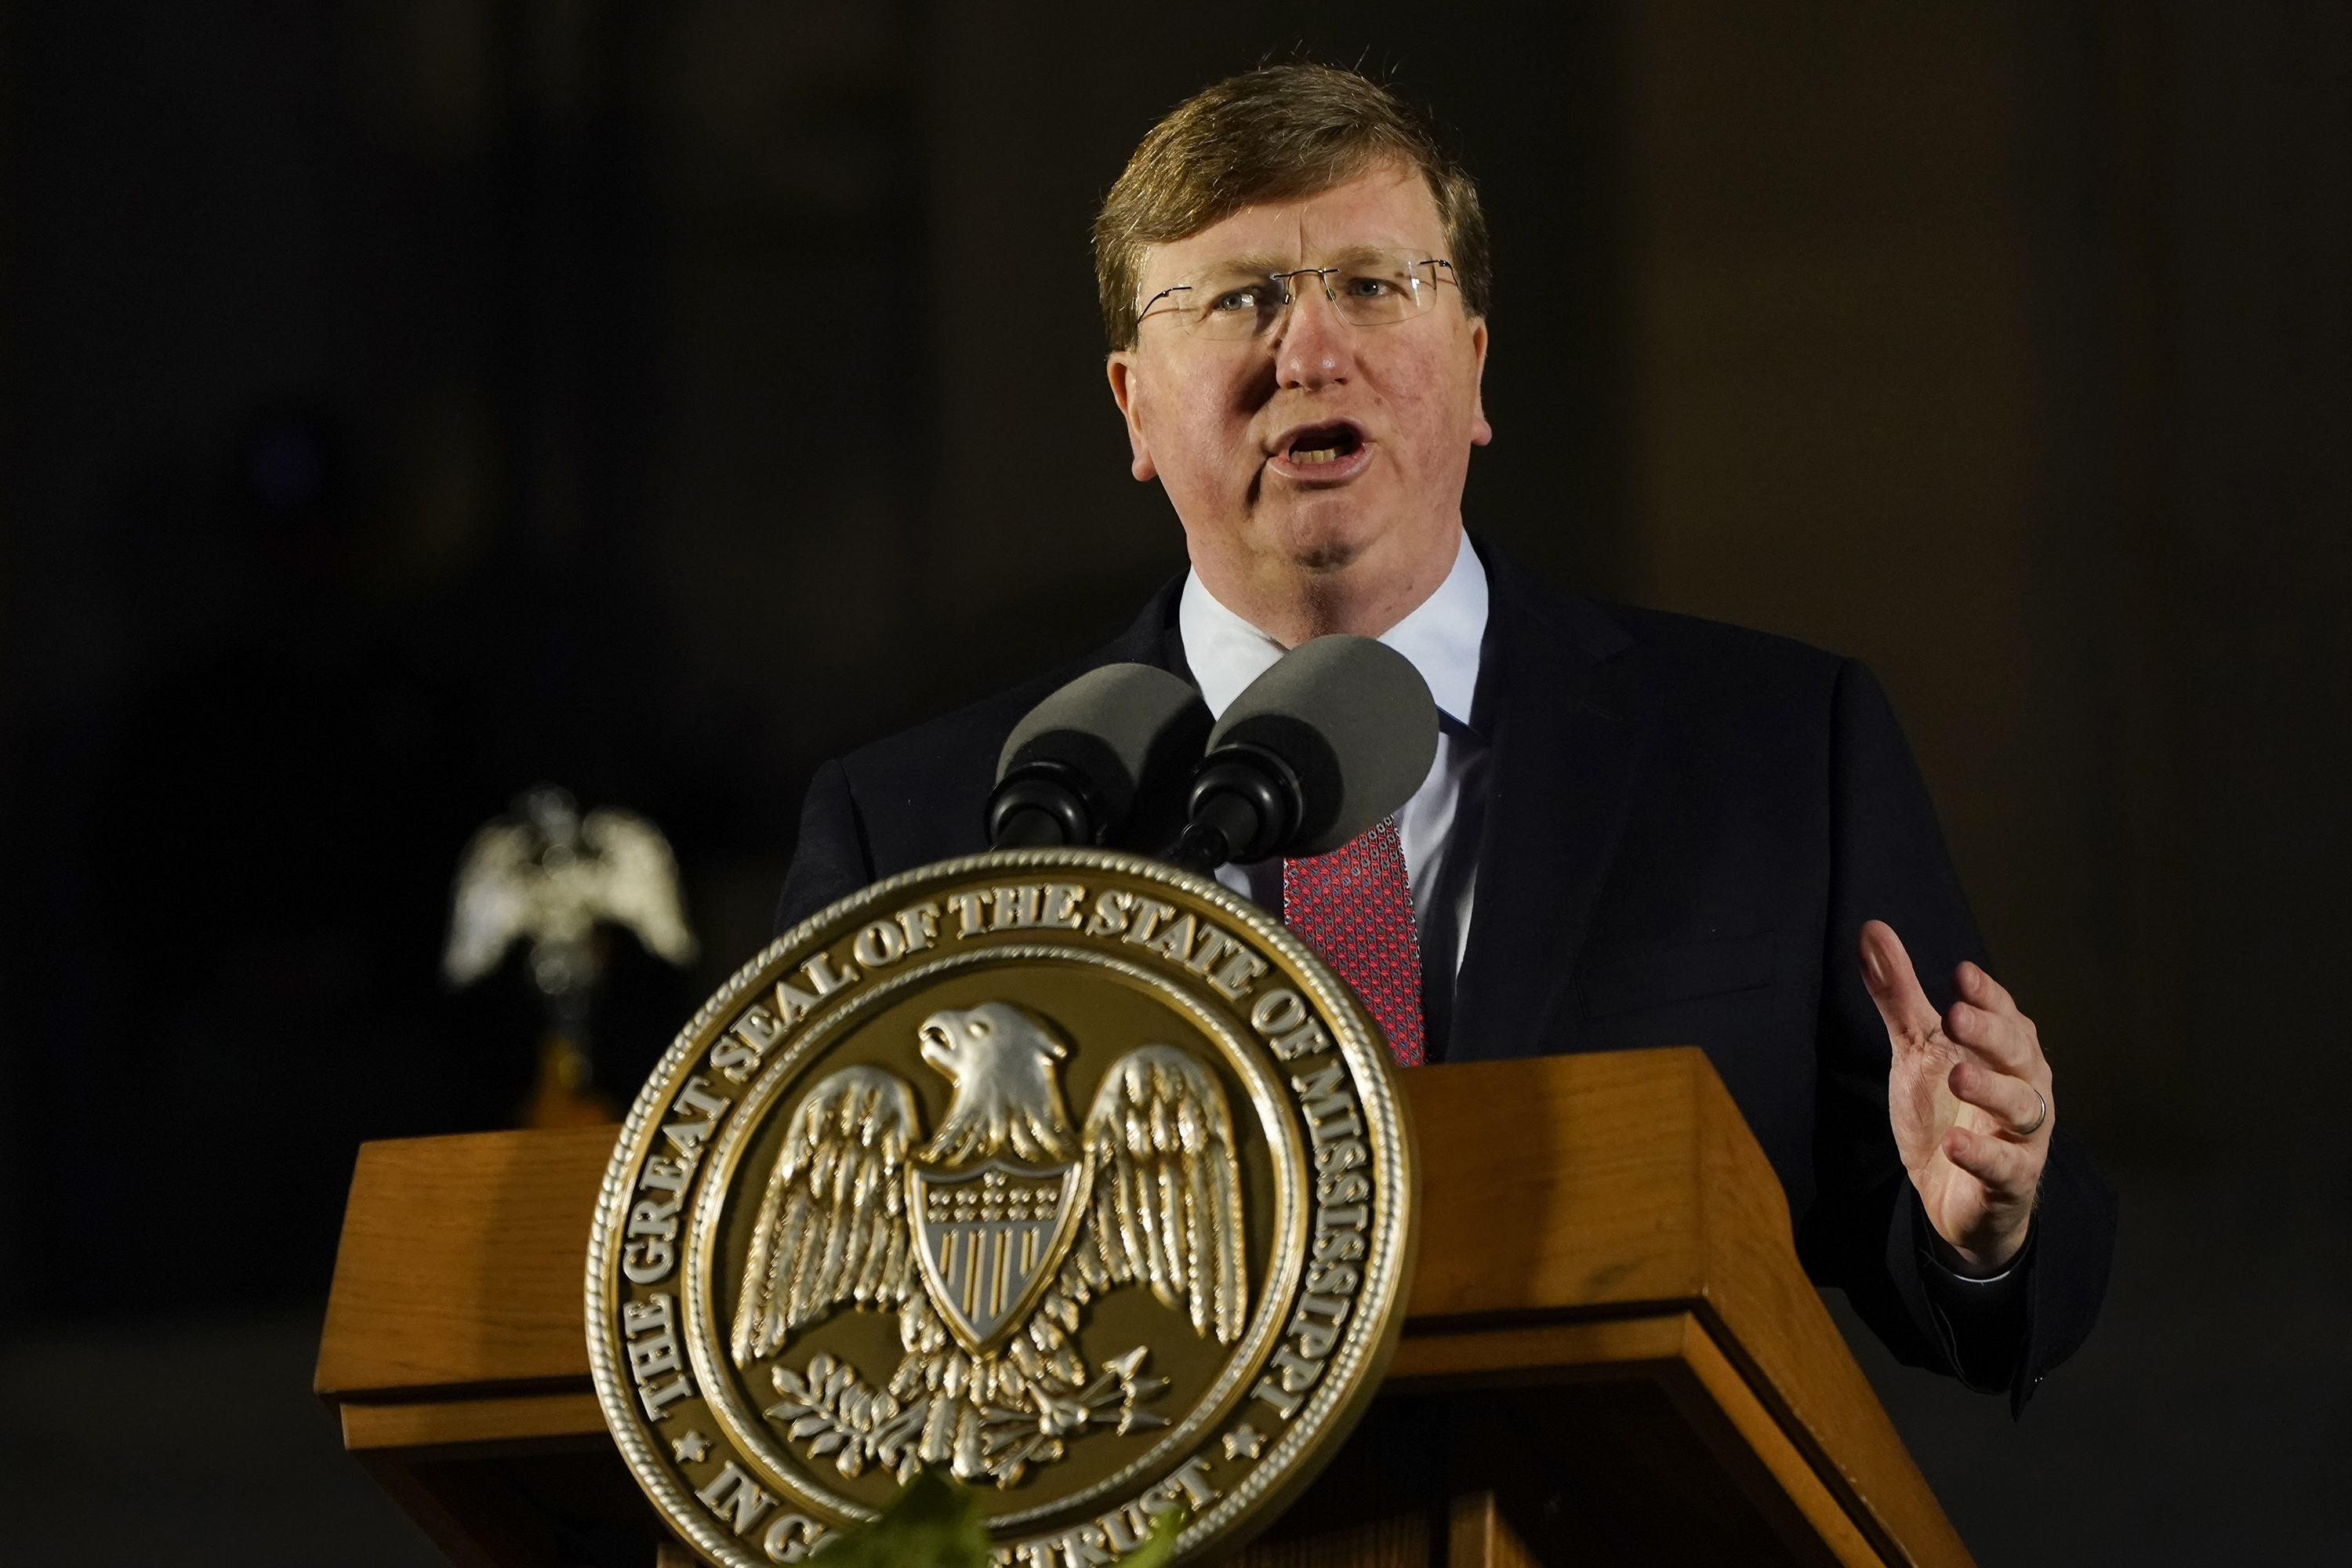 Republican Gov. Tate Reeves speaks during his State of the State address before a joint session of the Mississippi Legislature on the steps of the State Capitol in Jackson, Mississippi, on January 30.